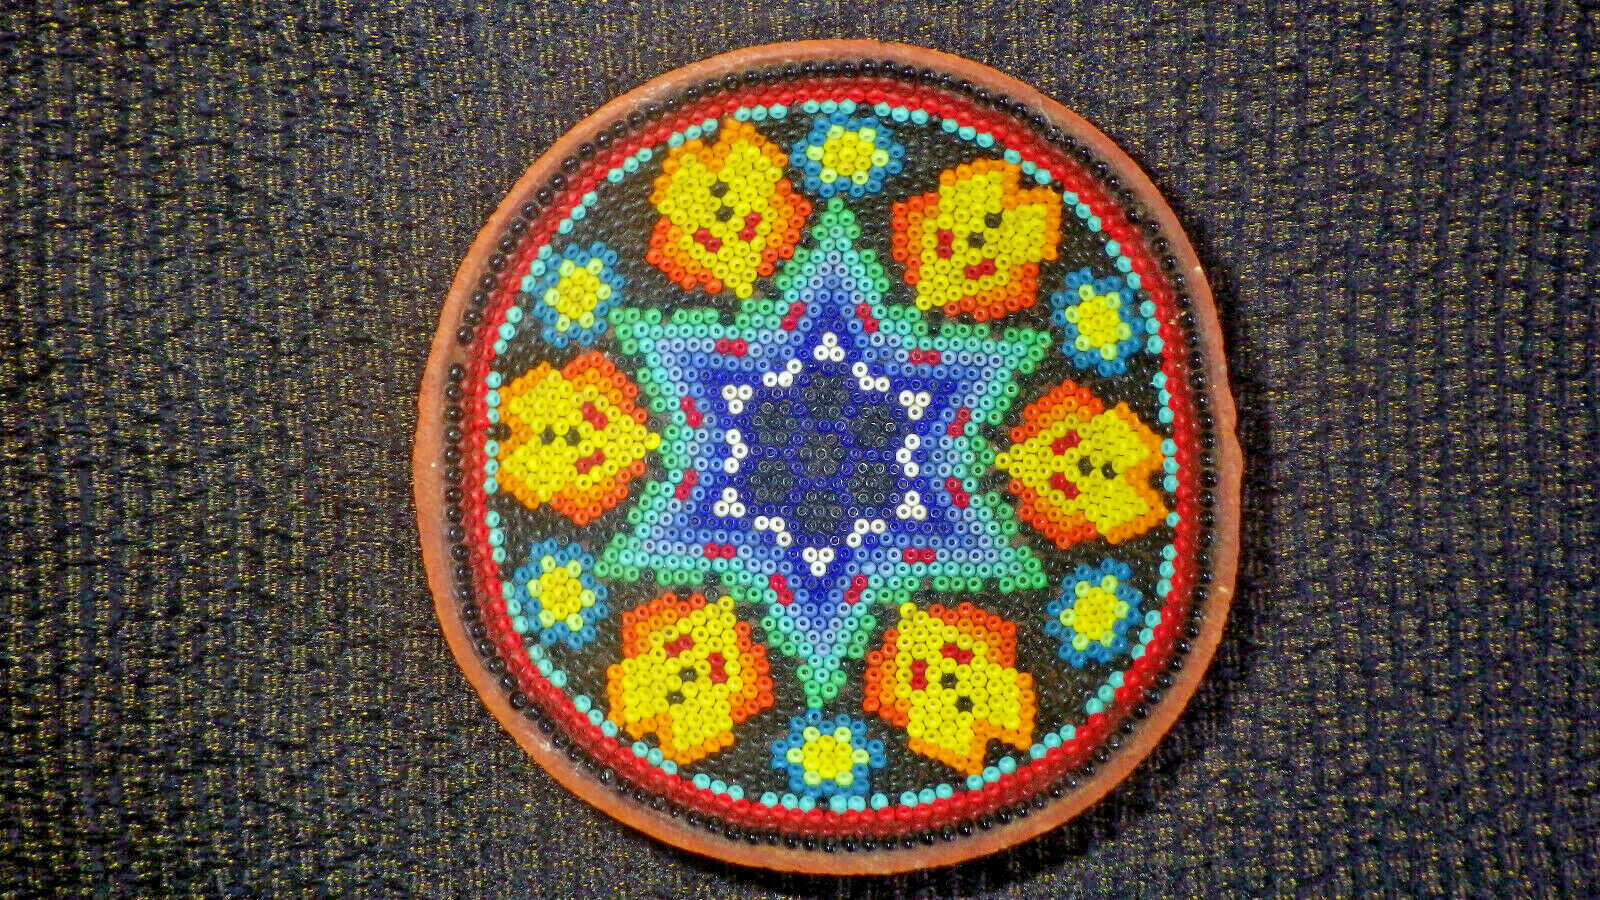 Miniature Huichol Beaded Offering Gourd Bowl - 4 Inches In Diameter